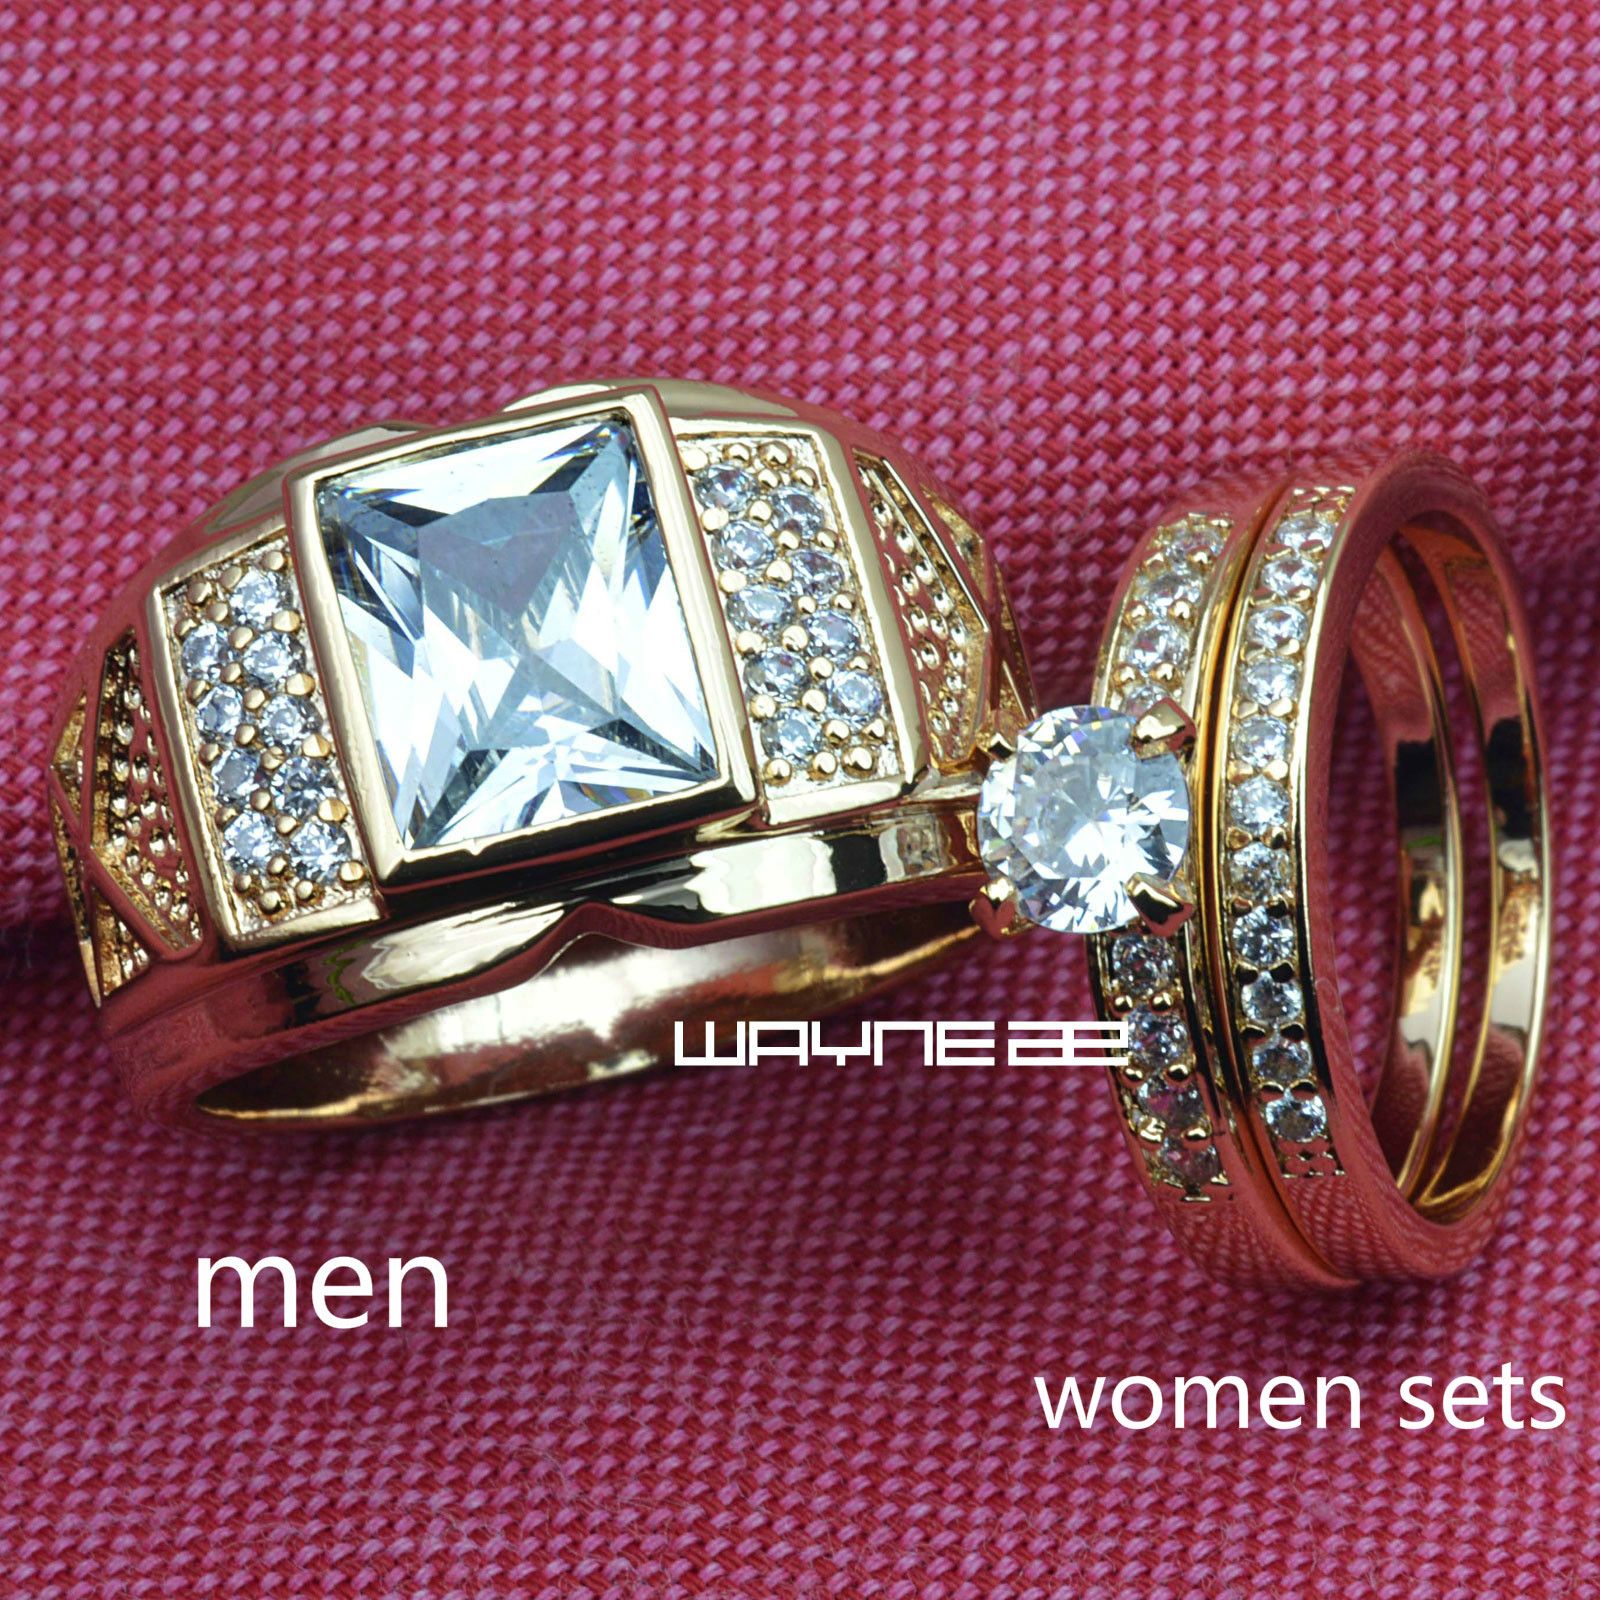 womens size 9 ring in mens